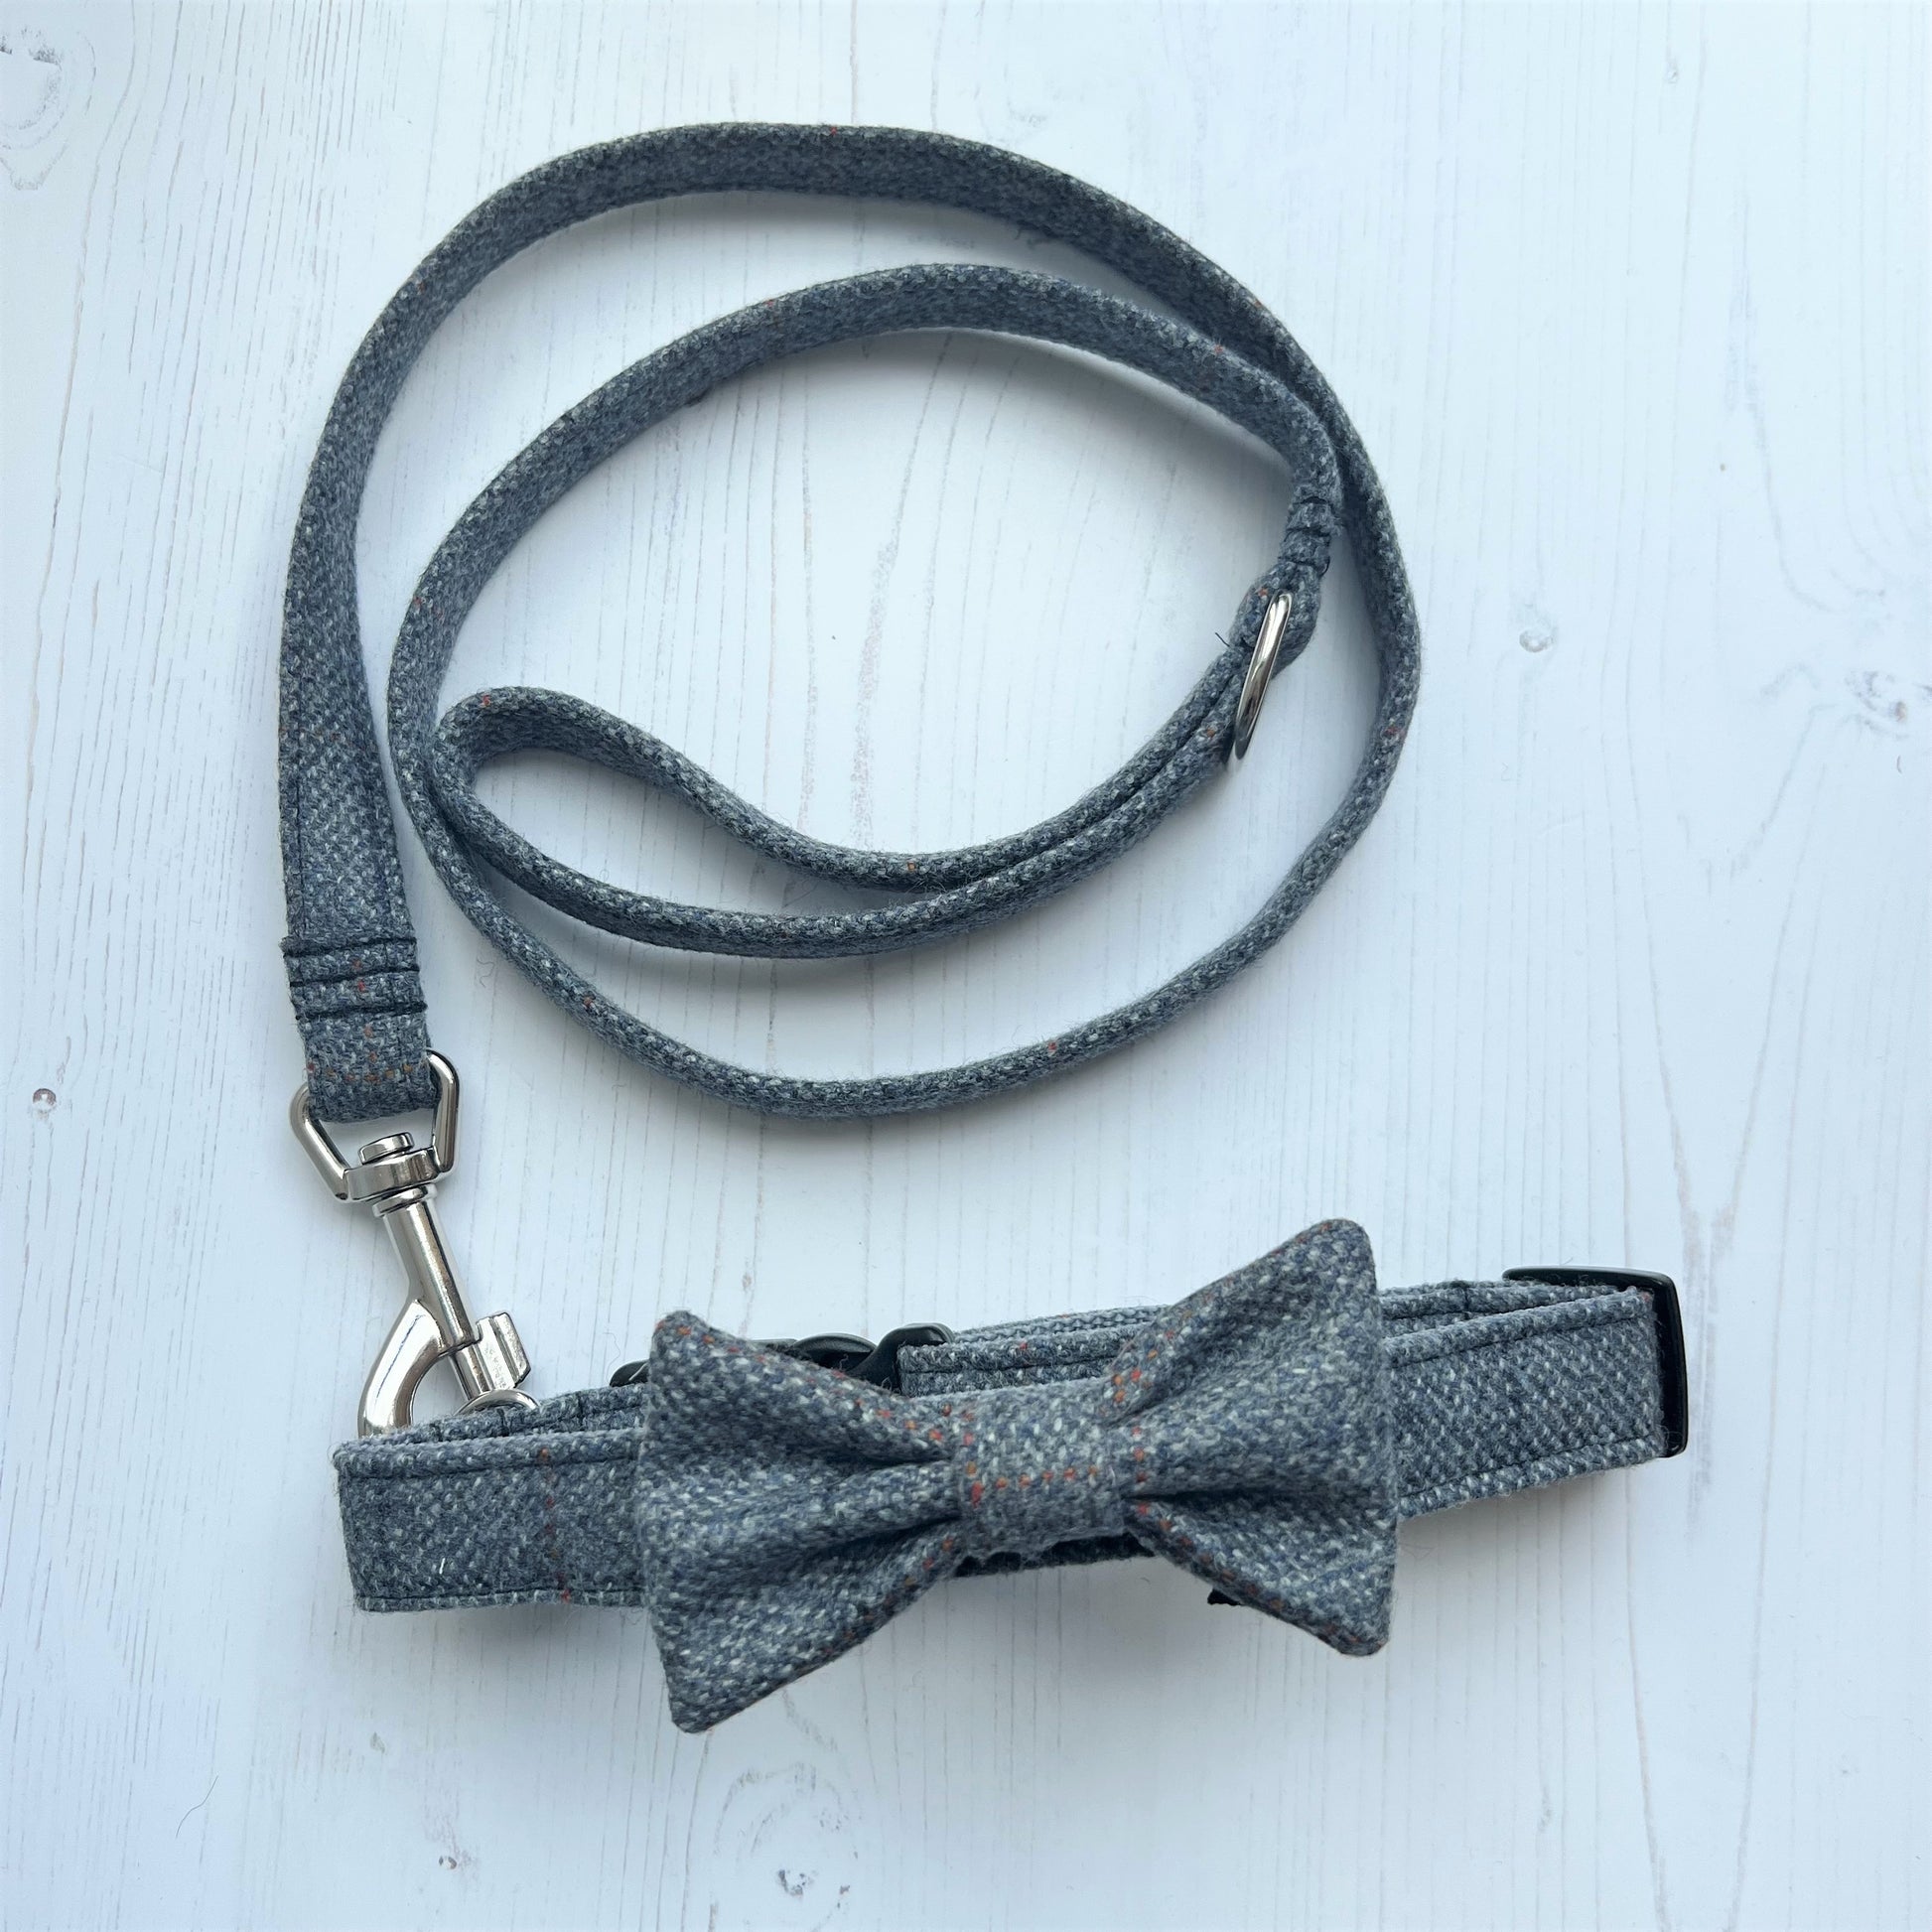 Pictured are University Tweed Collar, Leash and Pet Bowtie.